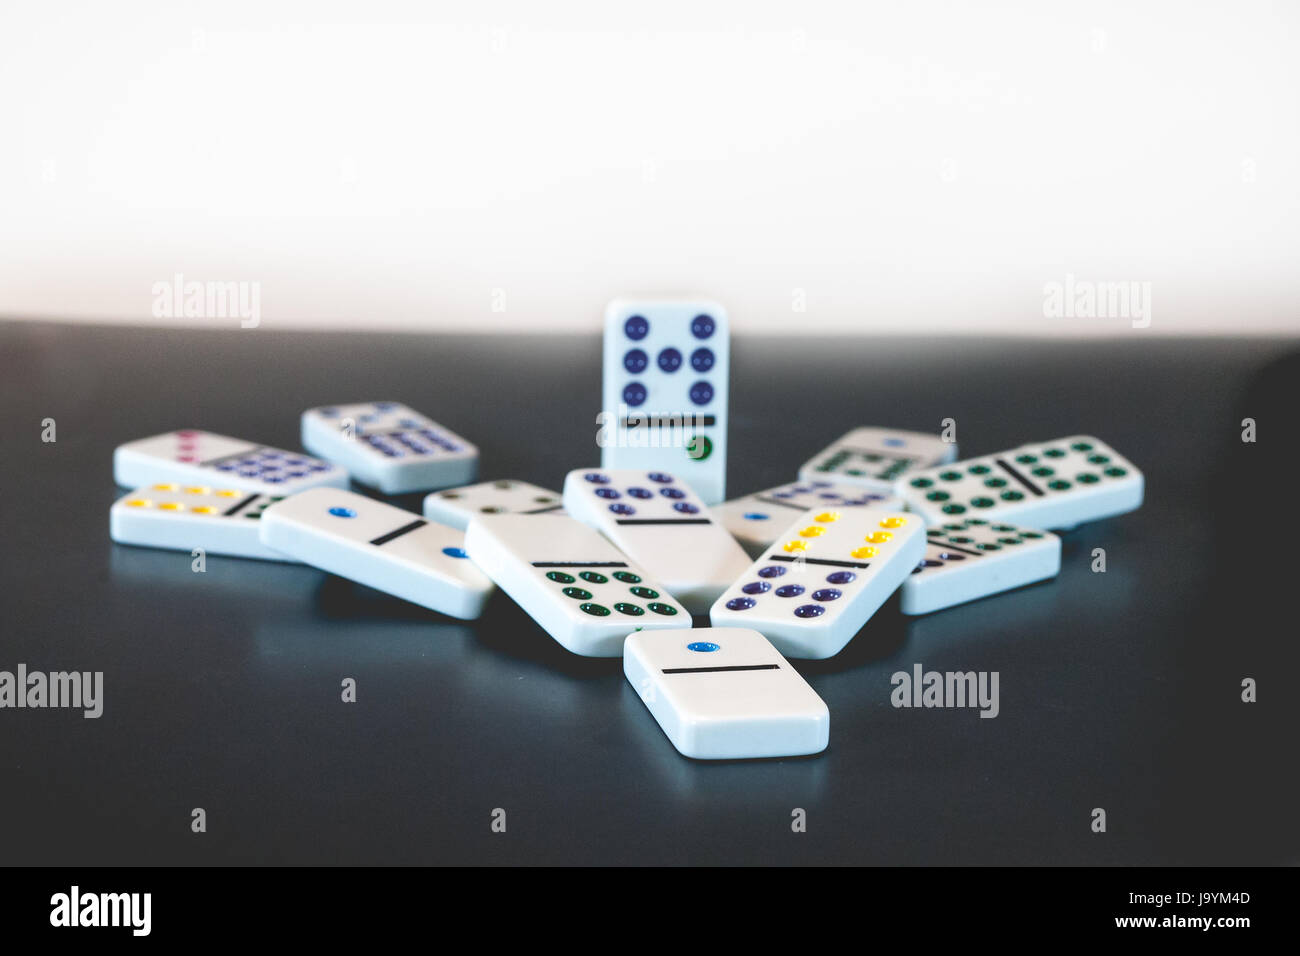 A single domino left standing after all others have fallen. Stock Photo